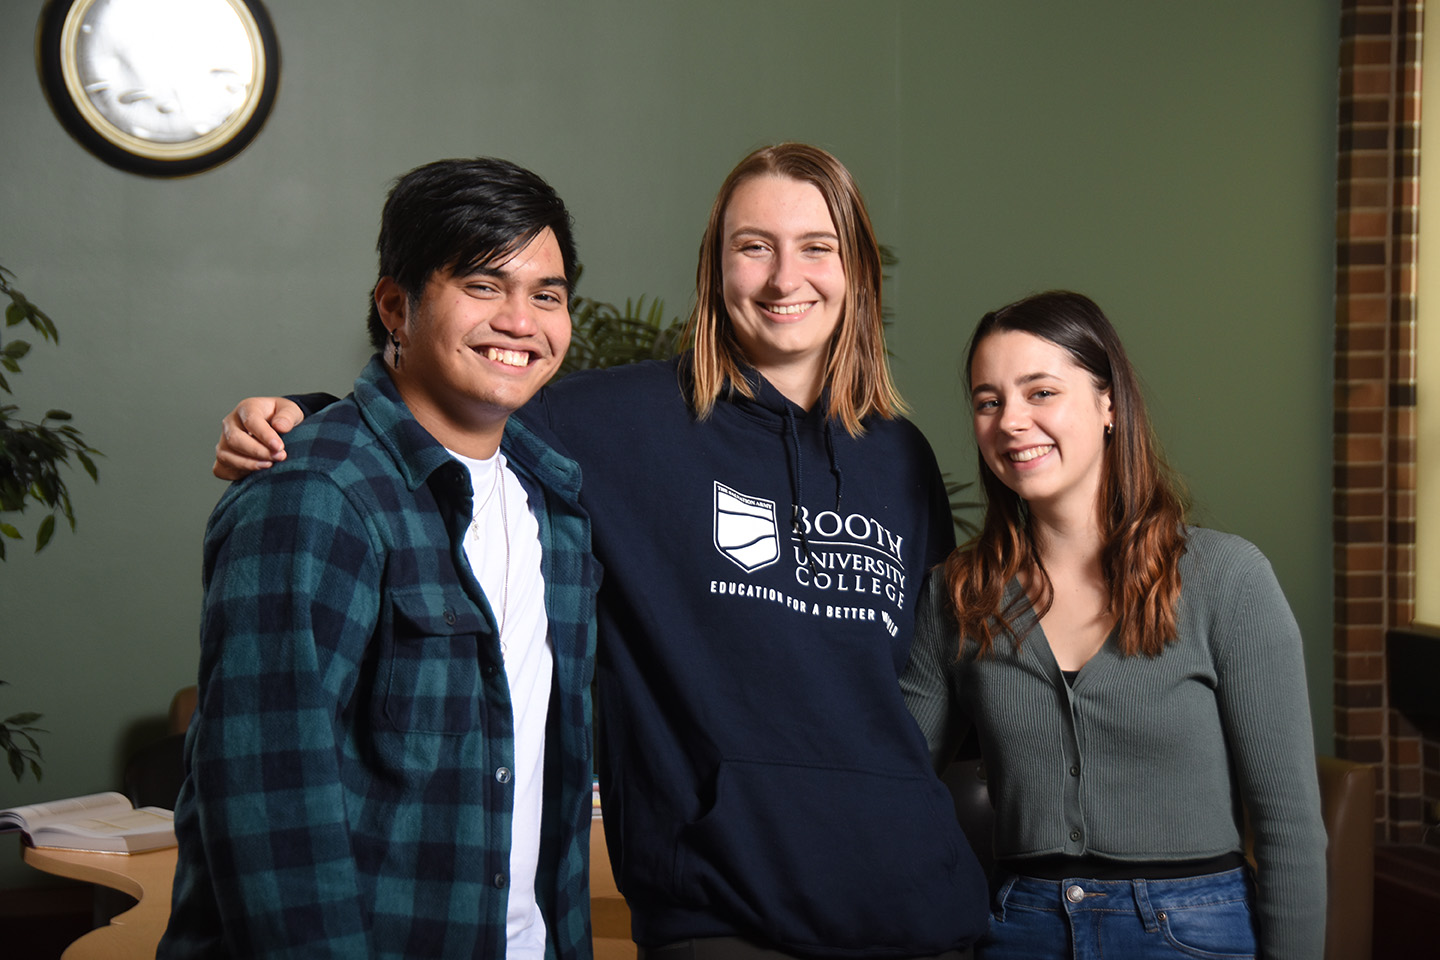 Three university students with arms around each other, smiling, looking at the camera.